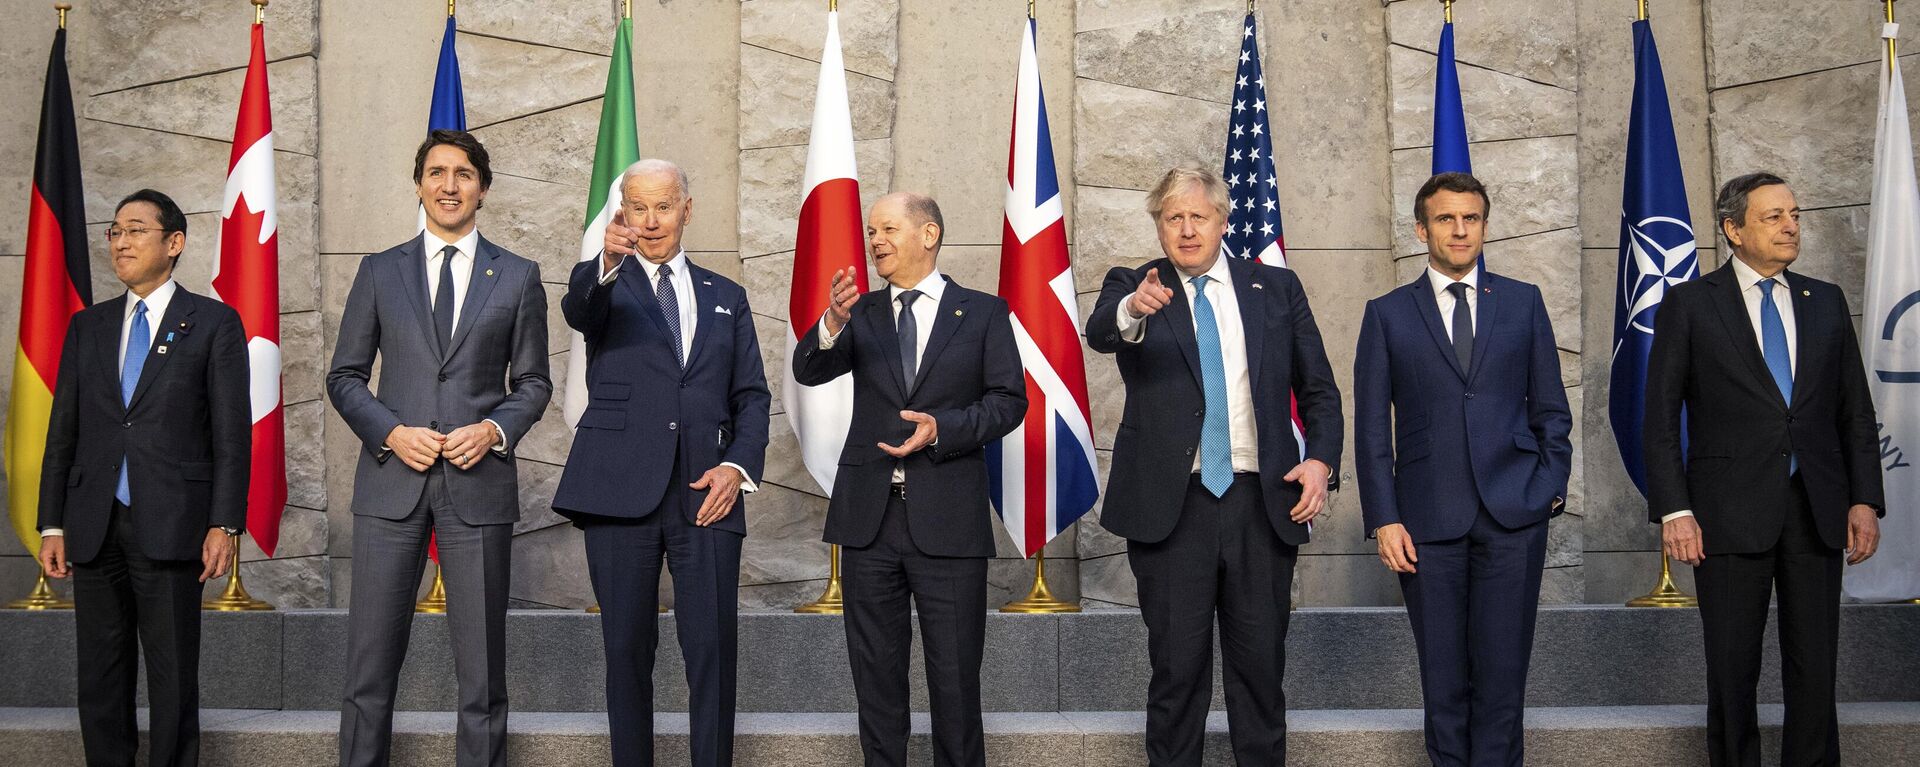 From left, Japan's Prime Minister Fumio Kishida, Canadian Prime Minister Justin Trudeau, U.S. President Joe Biden, German Chancellor Olaf Scholz, British Prime Minister Boris Johnson, French President Emmanuel Macron and Italian Prime Minister Mario Draghi pose for a group photo during an extraordinary NATO summit at NATO headquarters in Brussels, Belgium, Thursday, March 24, 2022. - Sputnik International, 1920, 07.04.2022